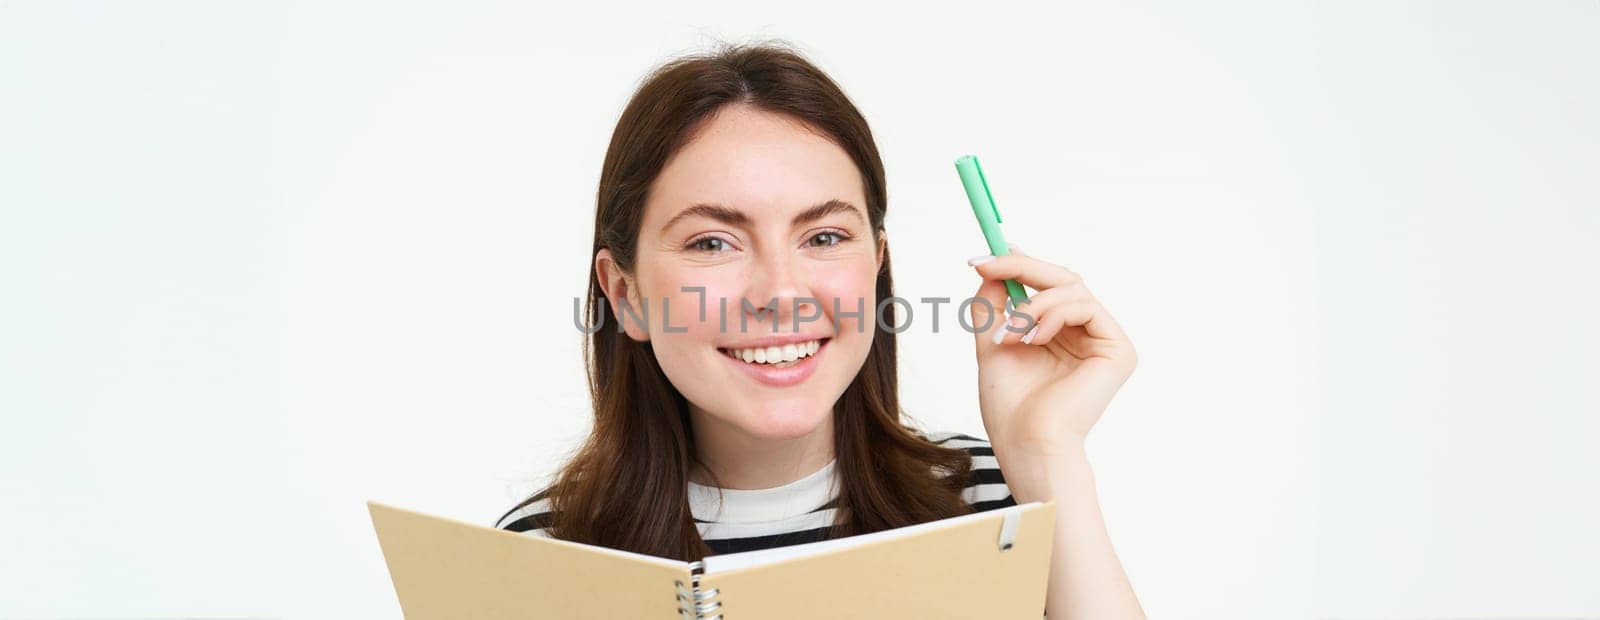 Image of beautiful young woman, student holding notebook, memo planner and pen, smiling and looking happy, isolated against white background.